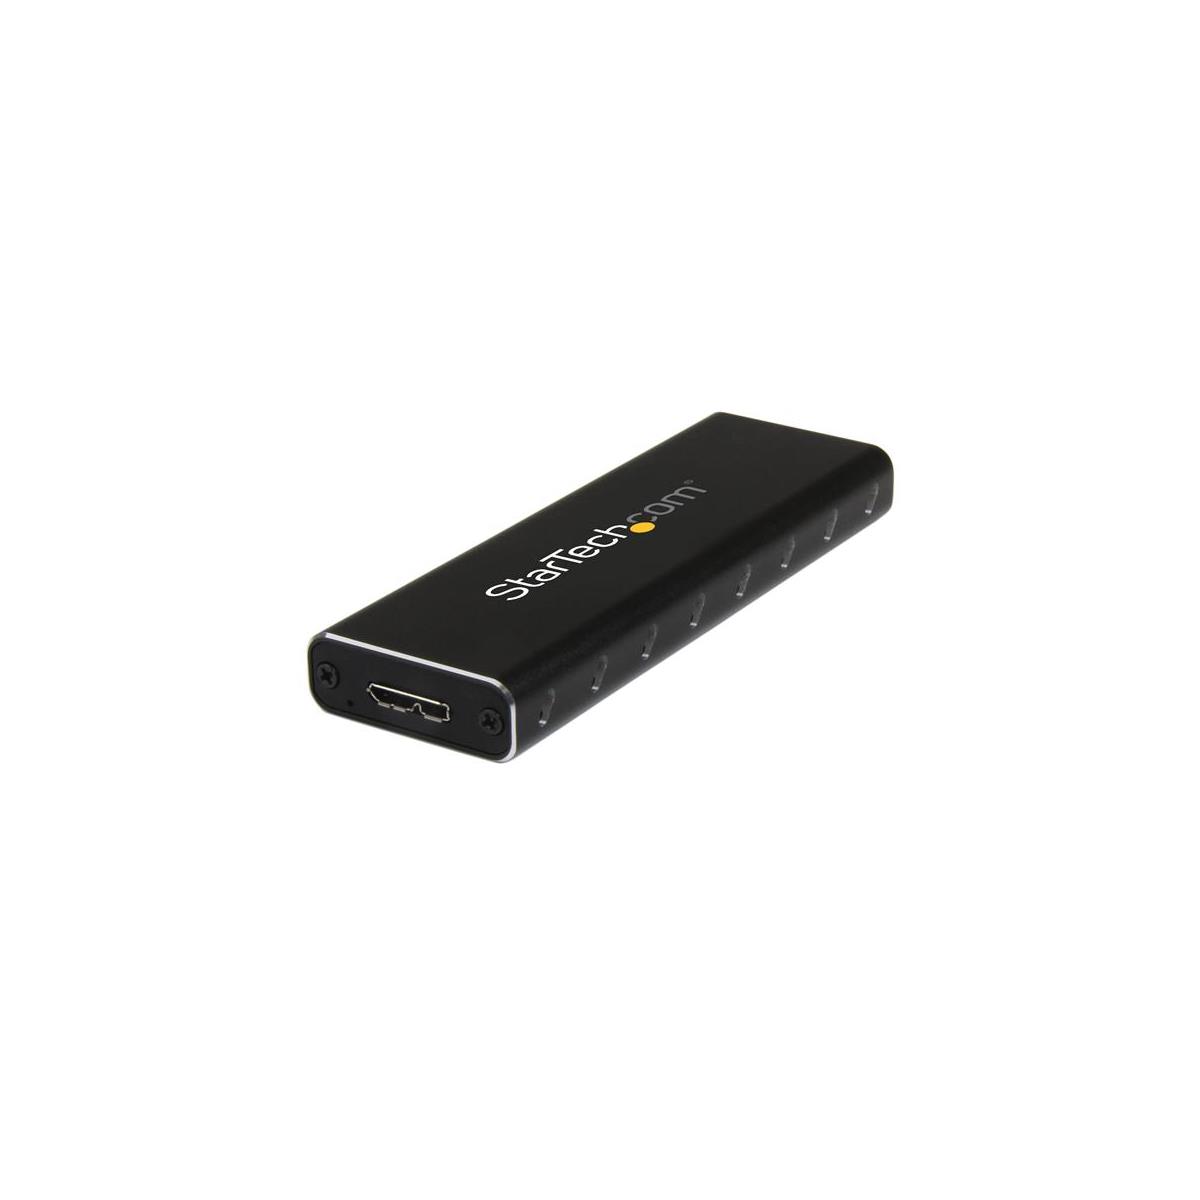 Image of StarTech USB 3.0 to M.2 NGFF External SSD Aluminum Enclosure with UASP